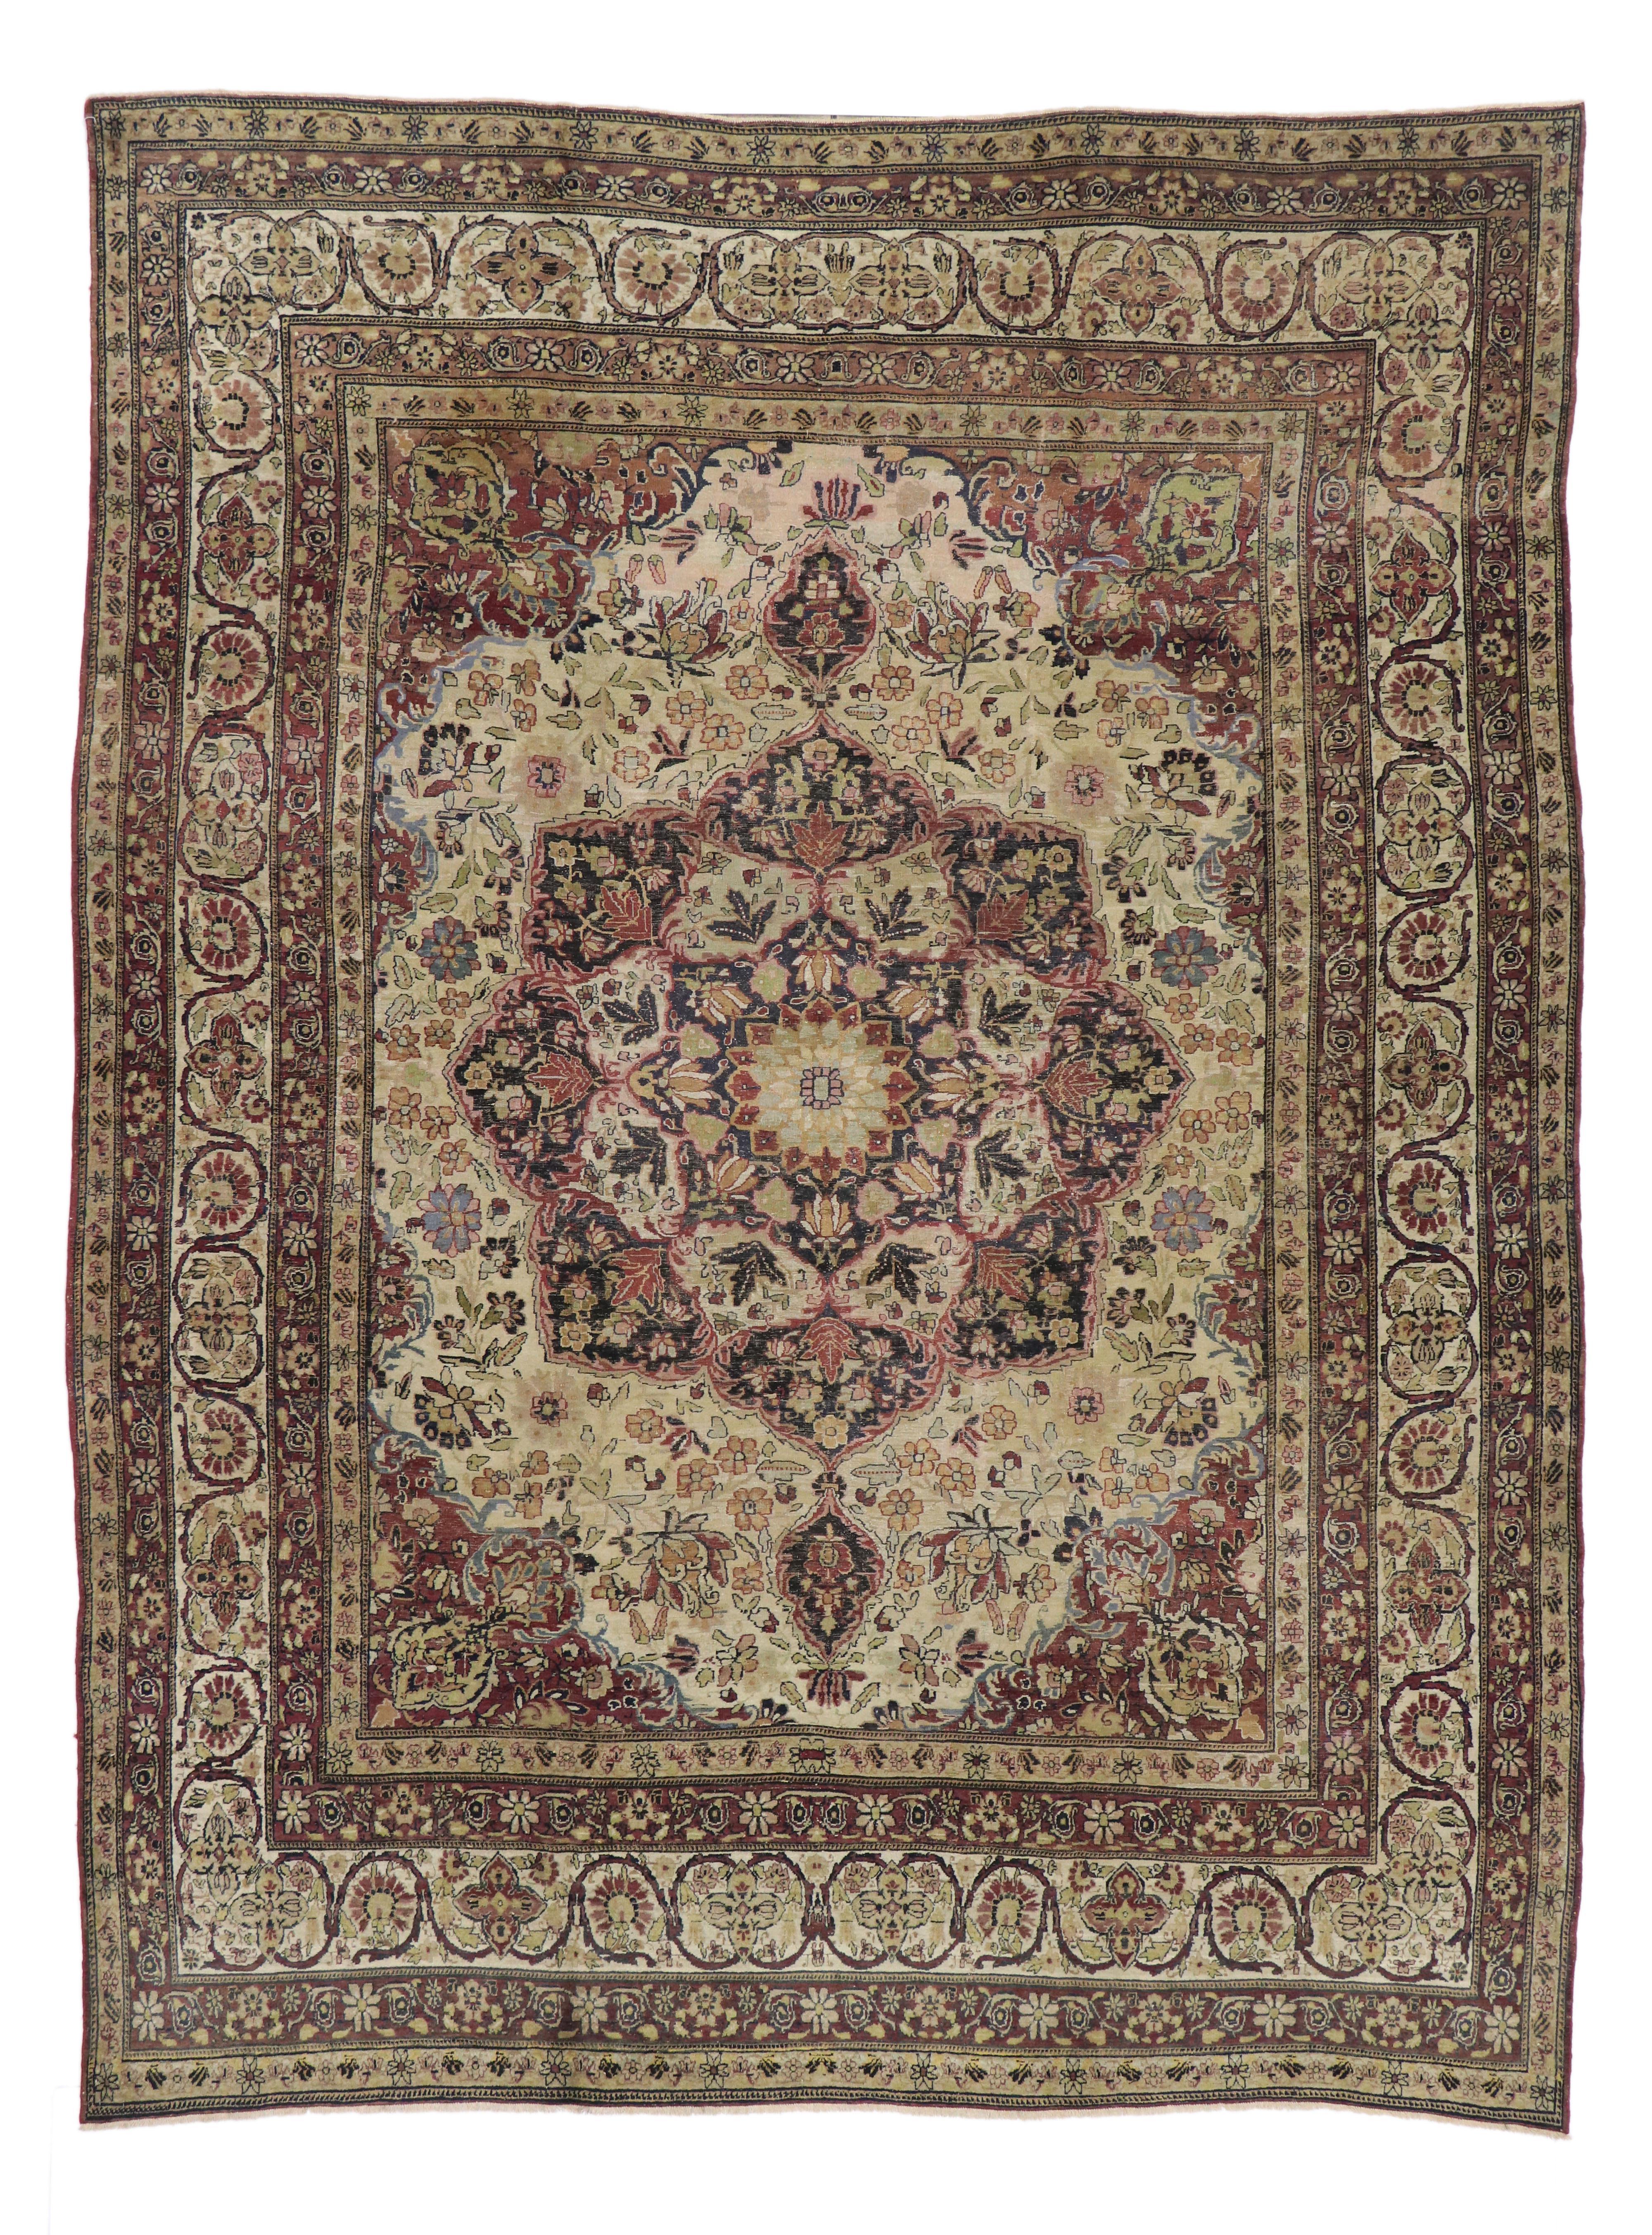 72920 Late 19th Century Antique Persian Kermanshah Area Rug 07'11 x 10'05. This late 19th century Kermanshah rug features a grand scale center medallion with complementary spandrels in an overall floral design. A vast field of an extraordinarily